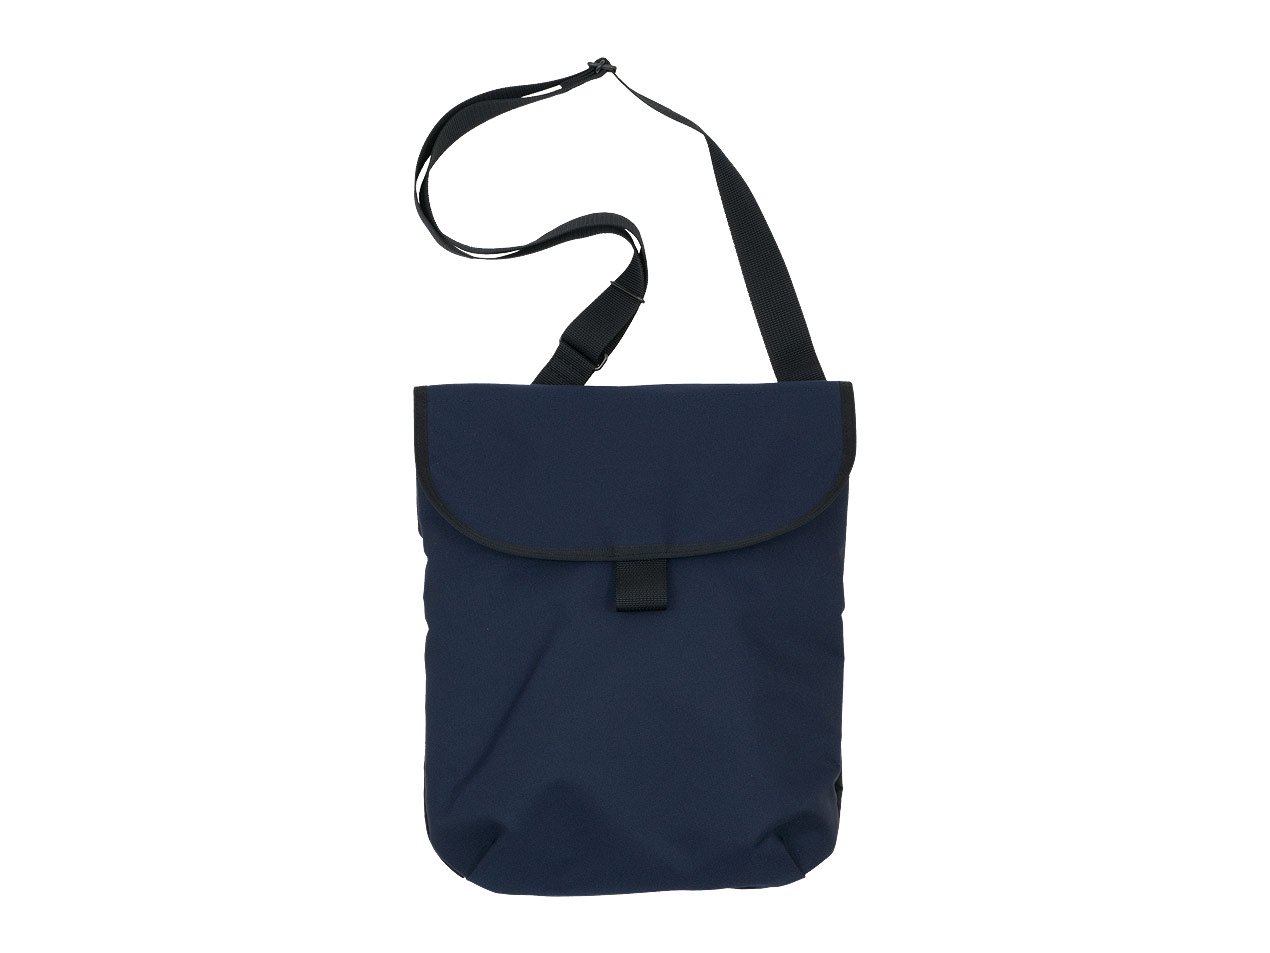 MARGARET HOWELL x PORTER CORDURA CANVAS A4 SIZE POUCH 120NAVY